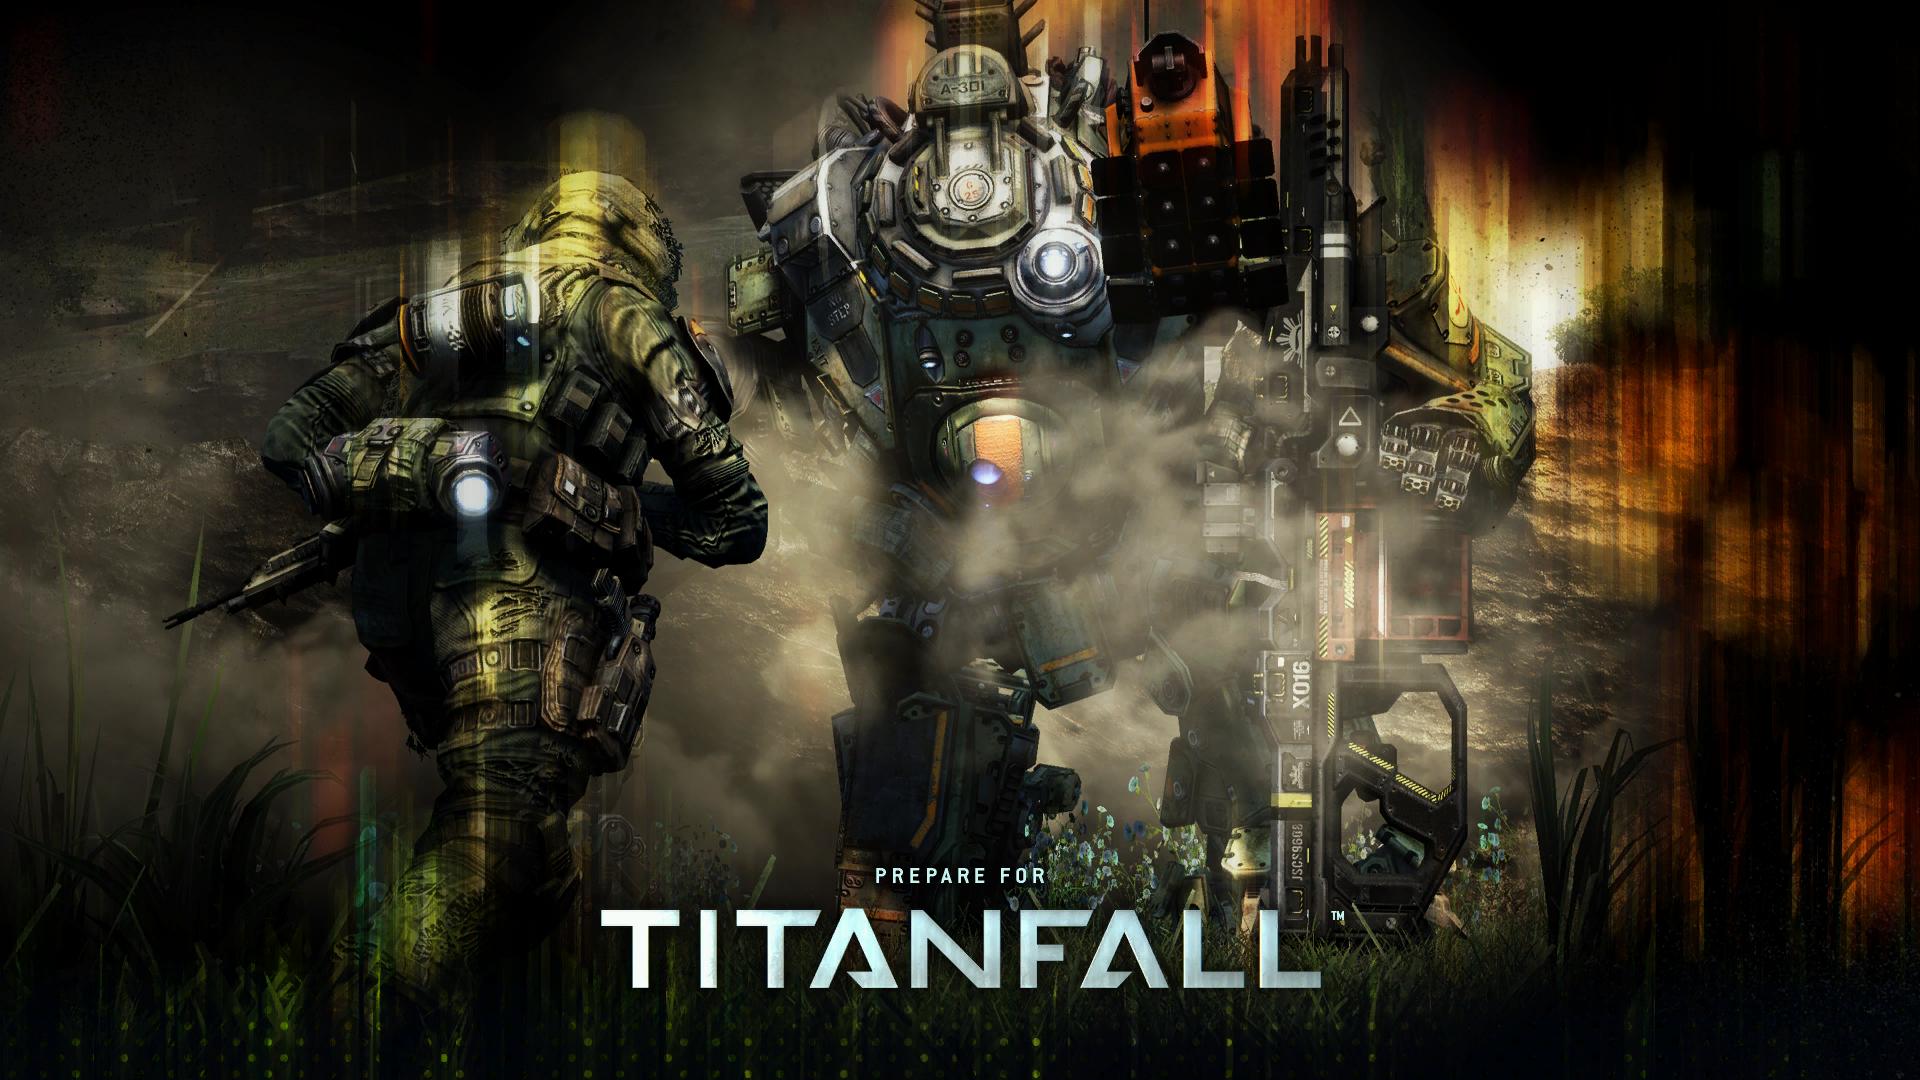 Titanfall Wallpapers in HD